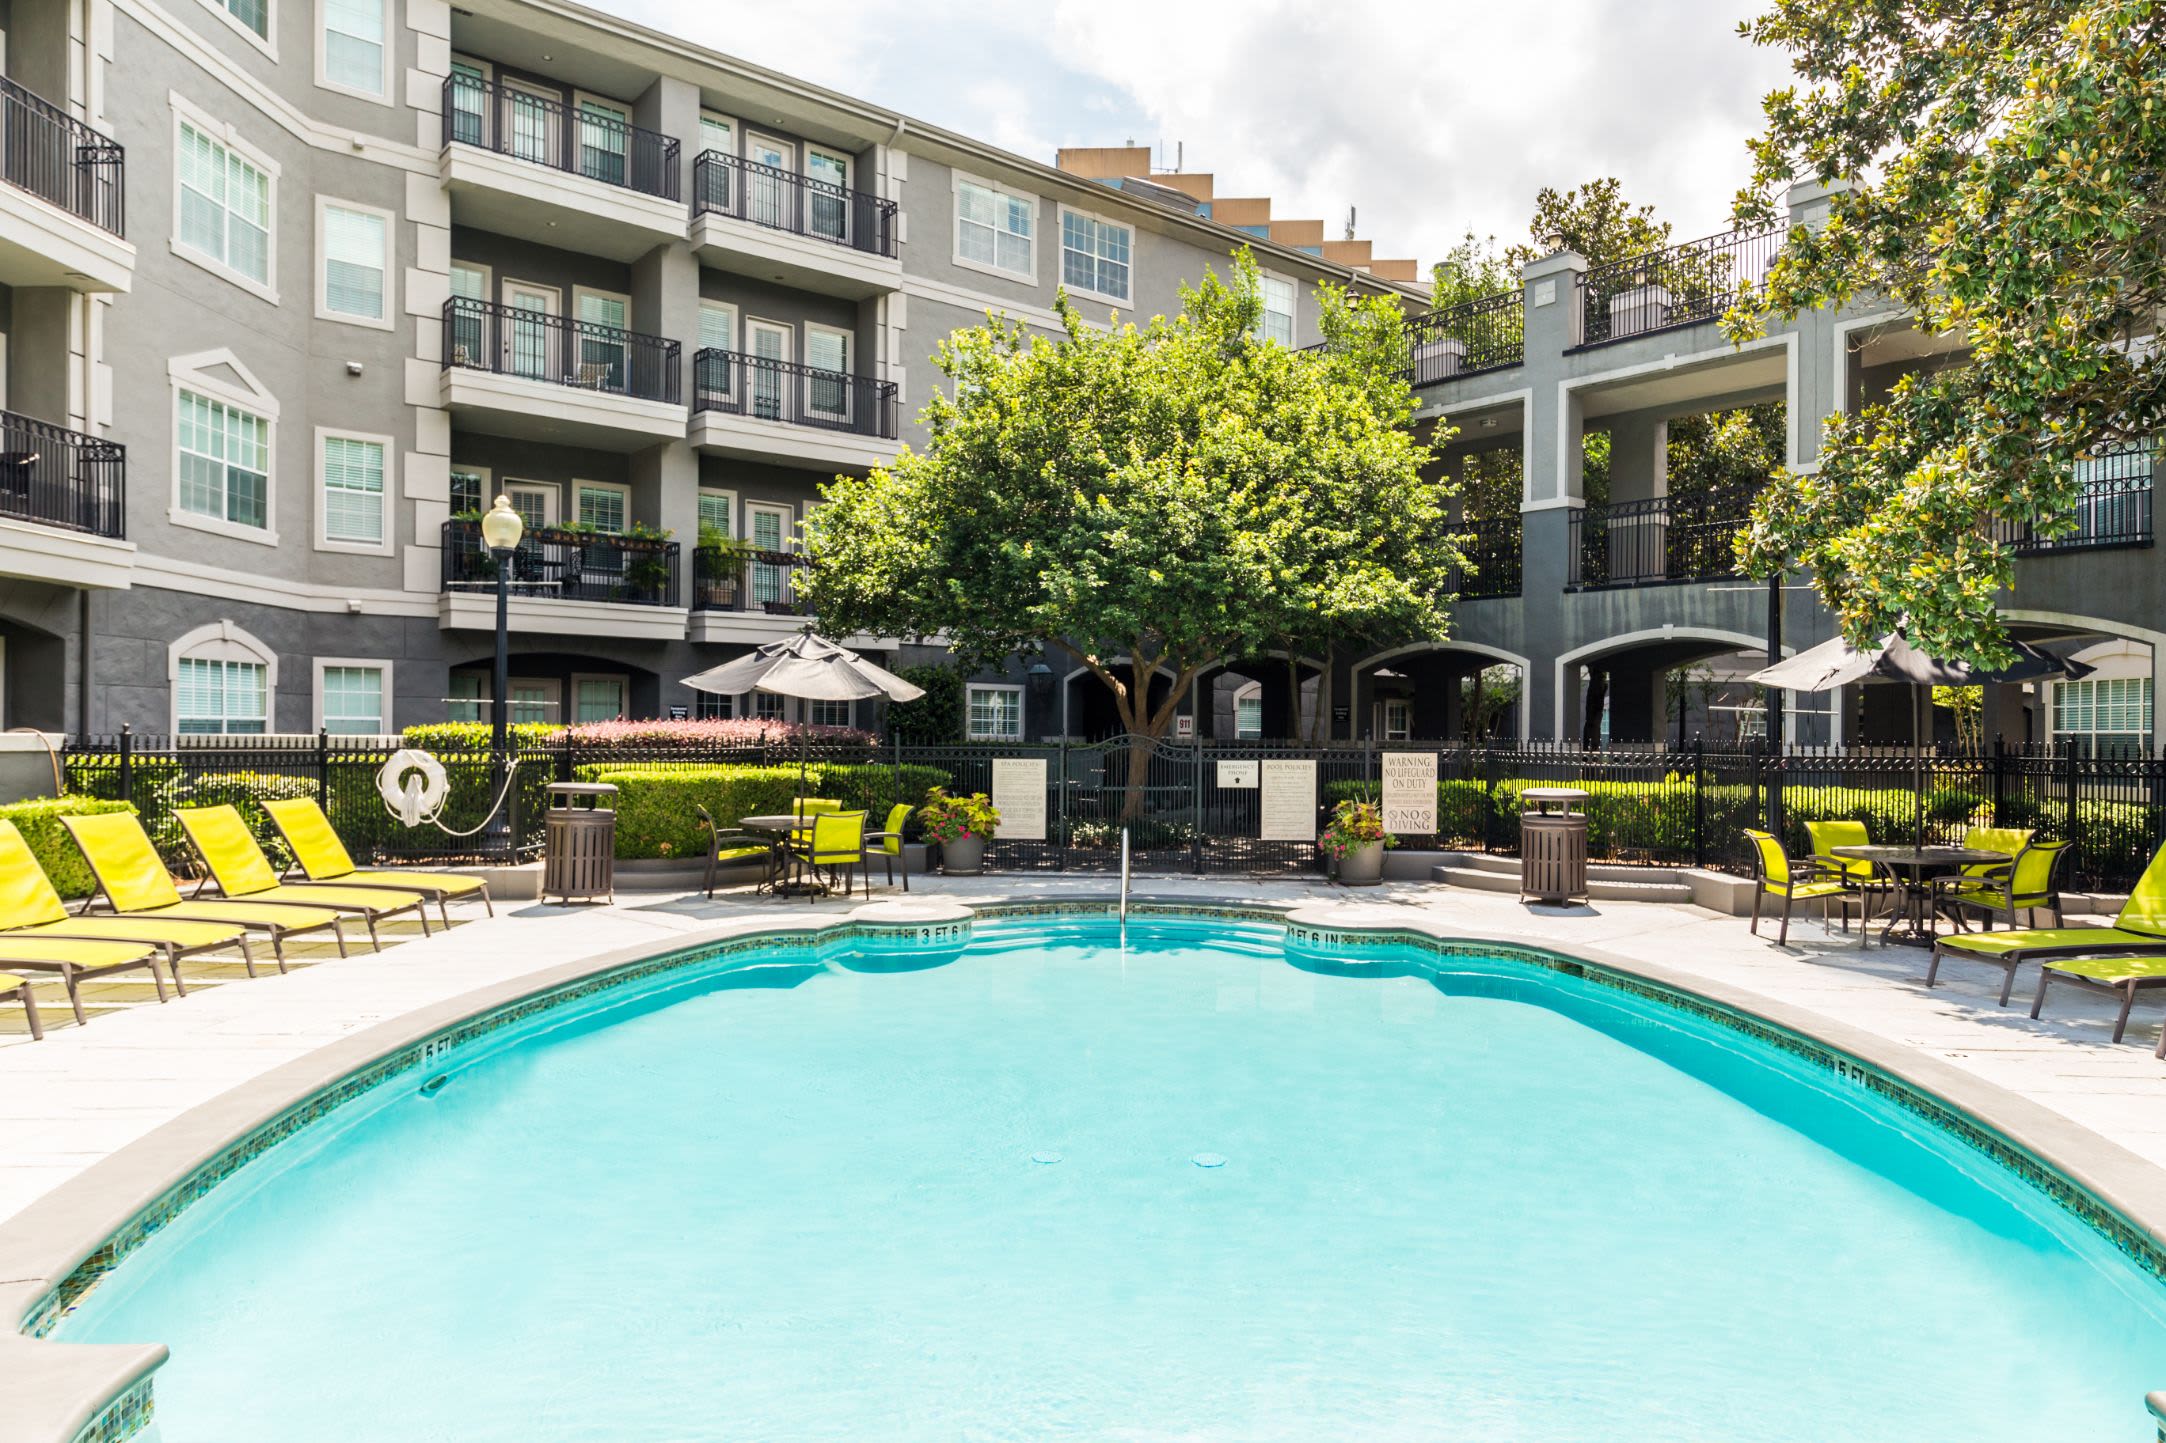 Swimming pool with apartments behind at Marquis at Tanglewood in Houston, Texas